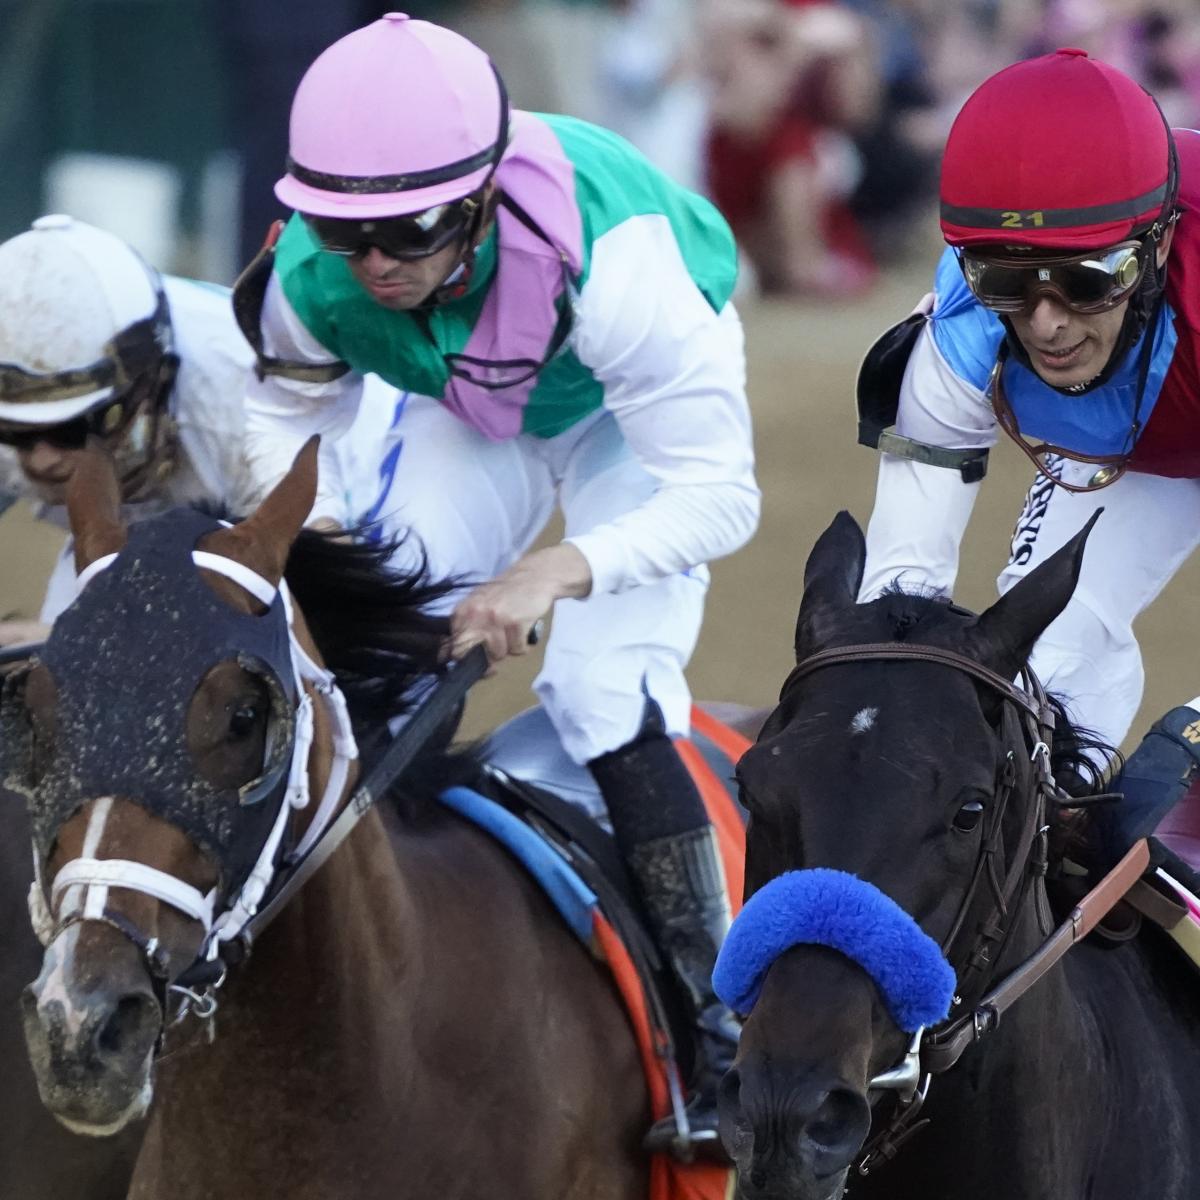 Preakness 2021 Contenders Horses and Jockeys with Best Chance at